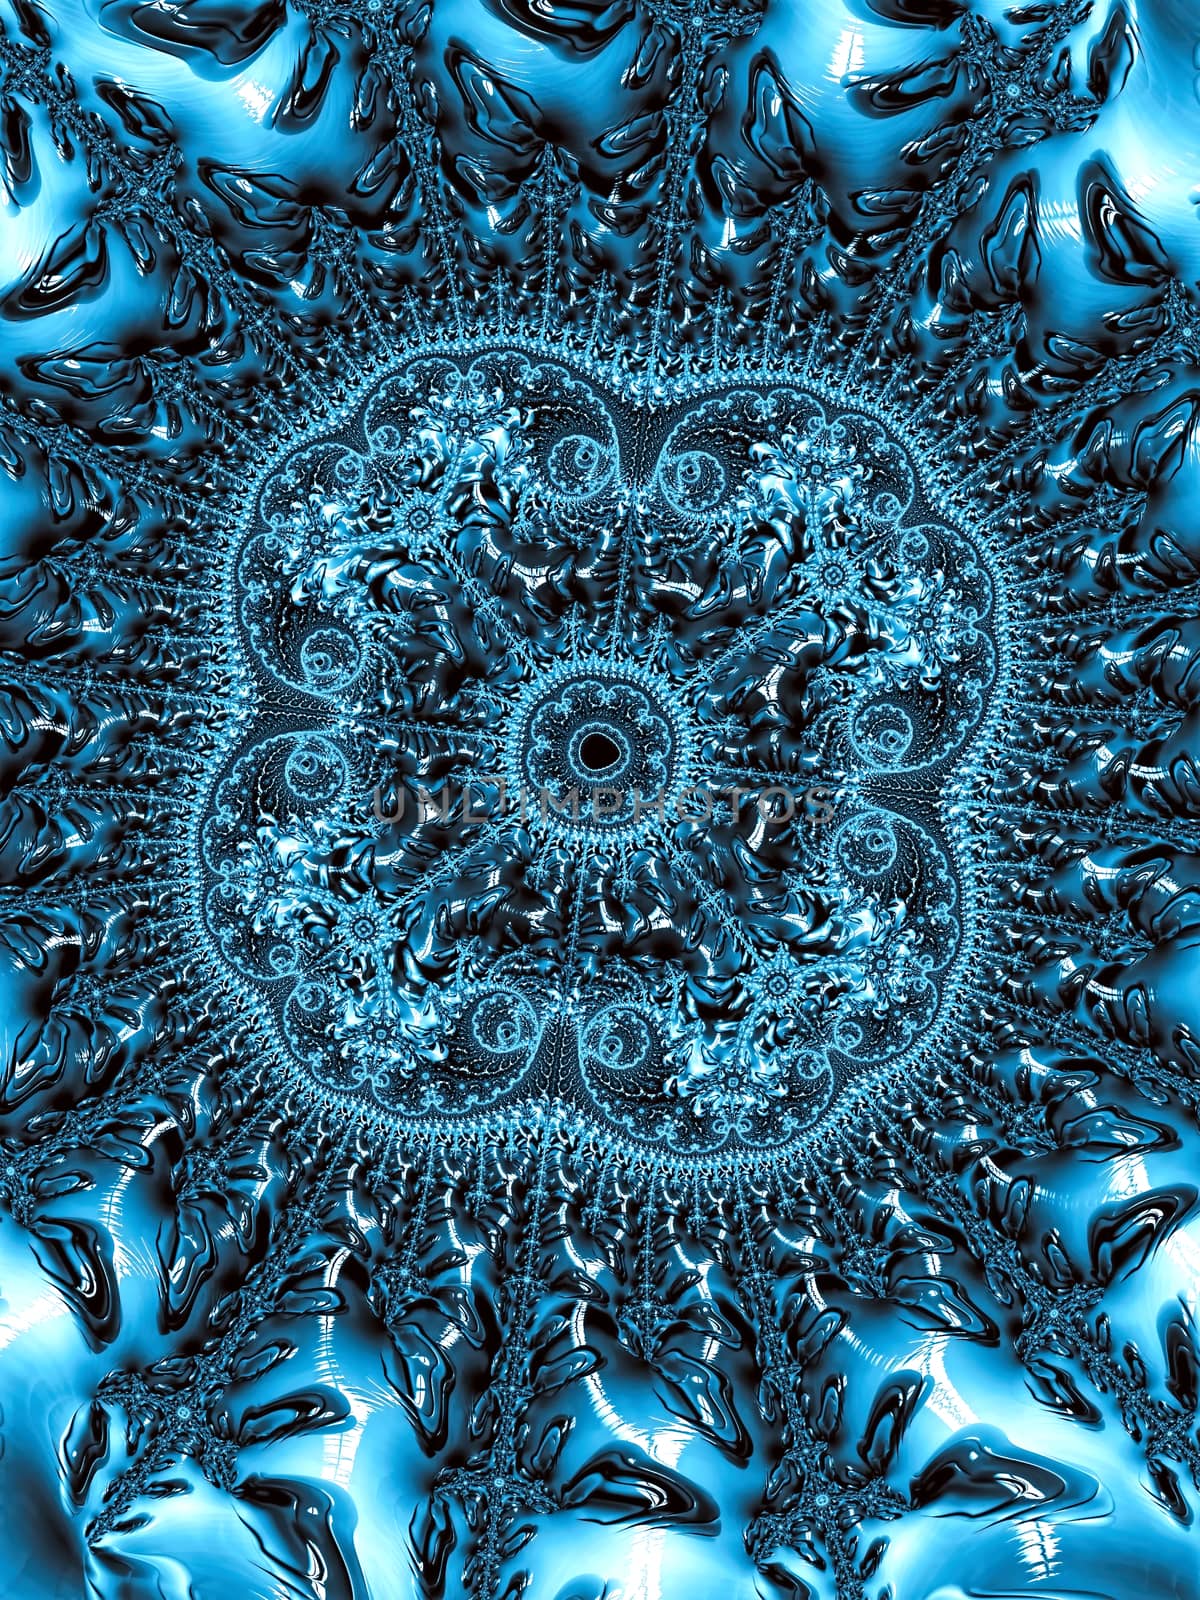 Abstract fractal background - computer-generated illustration. Digital art: mystical pattern of curves, spirals, curls and flowers. Vertical image for wallpapers, playing card back, covers.